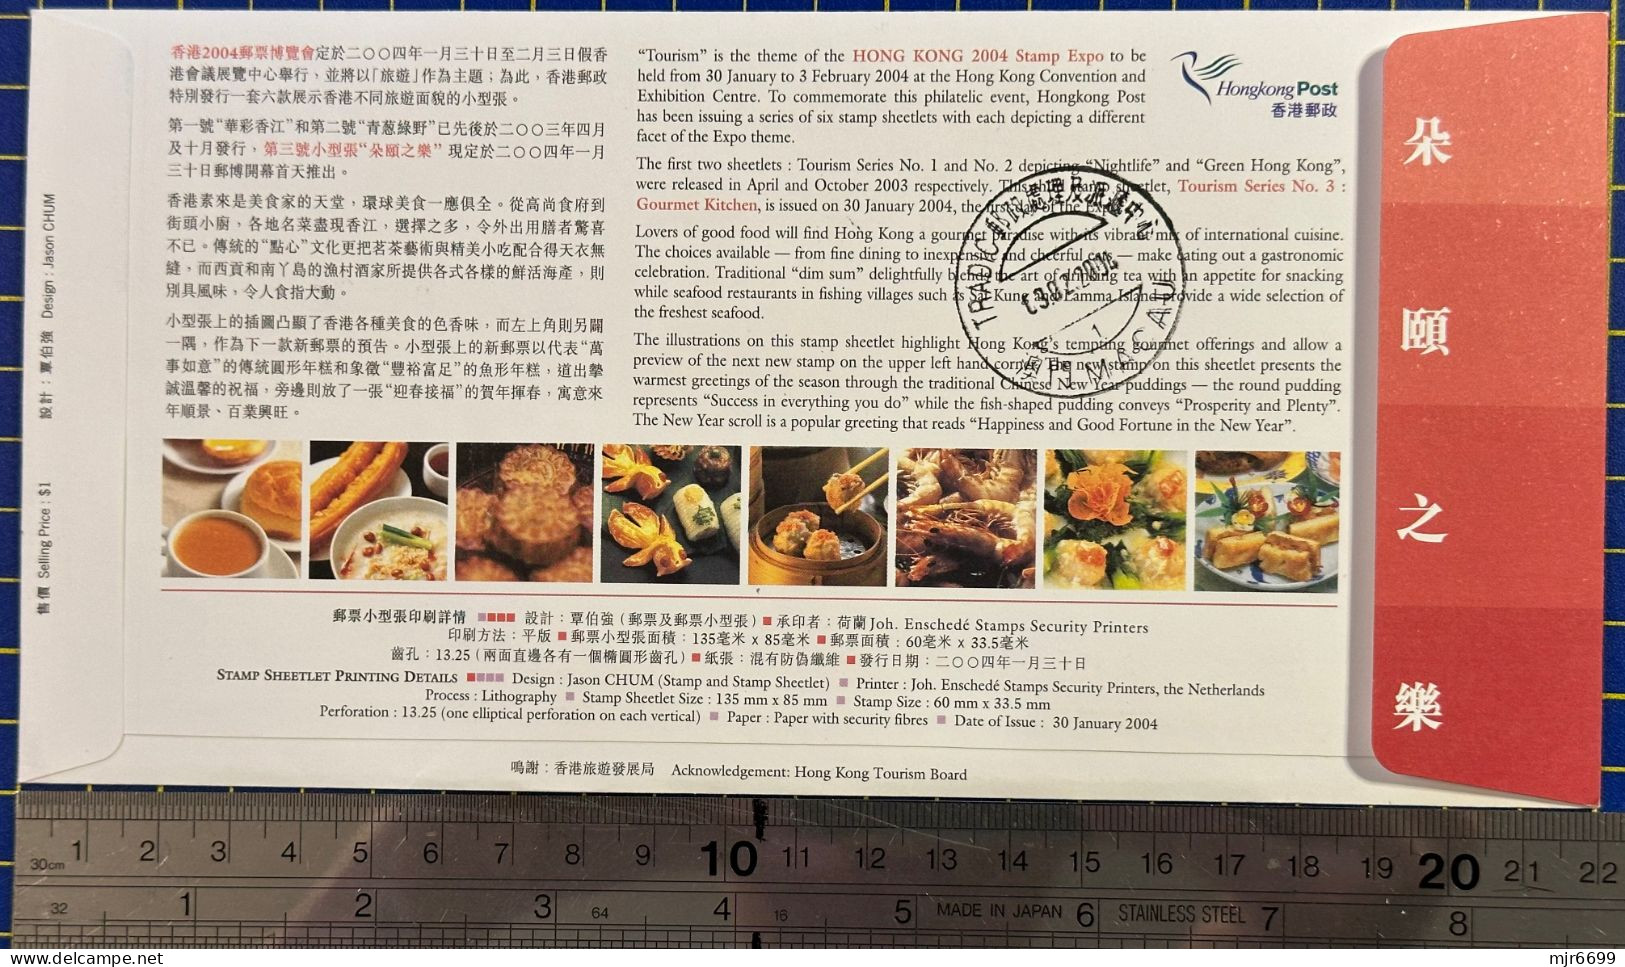 2004 HONG KONG STAMP EXPO COMMEMORATIVE COVER W/ HK & MACAU CANCEL, PLEASE SEE THE PHOTO - FDC